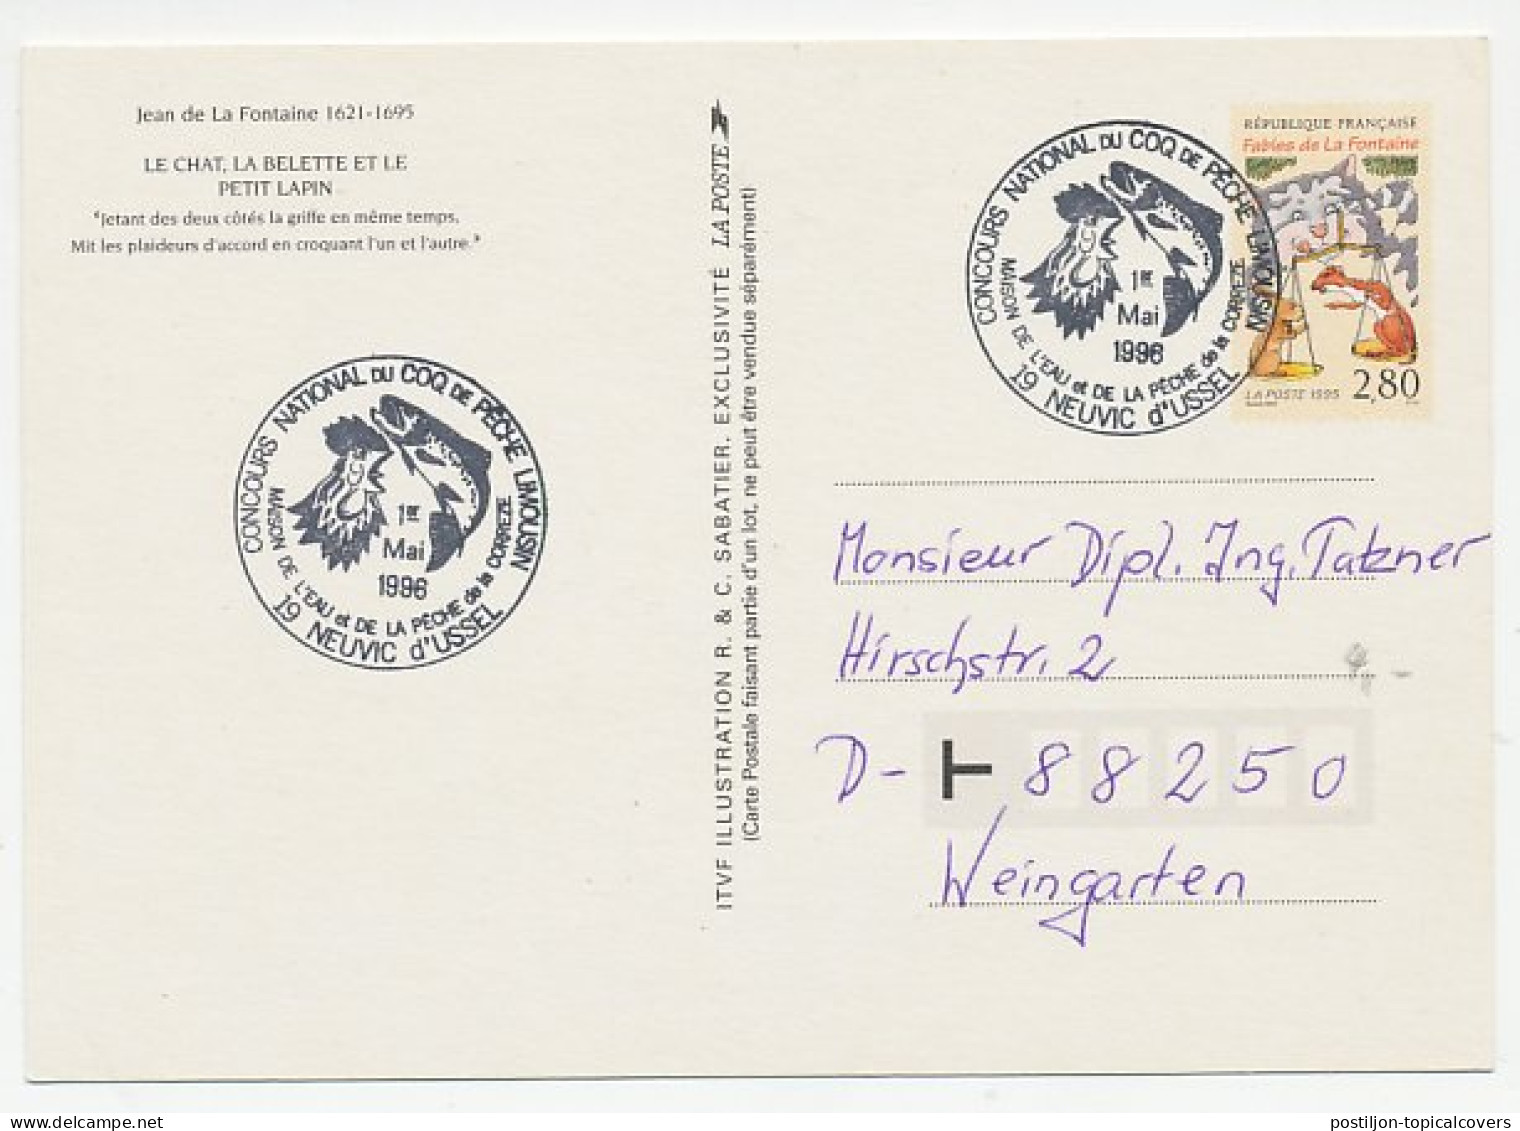 Postal Stationery / Postmark France 1996 Jean De La Fontaine - Cat, Weasel And Young Rabbit  - Fairy Tales, Popular Stories & Legends